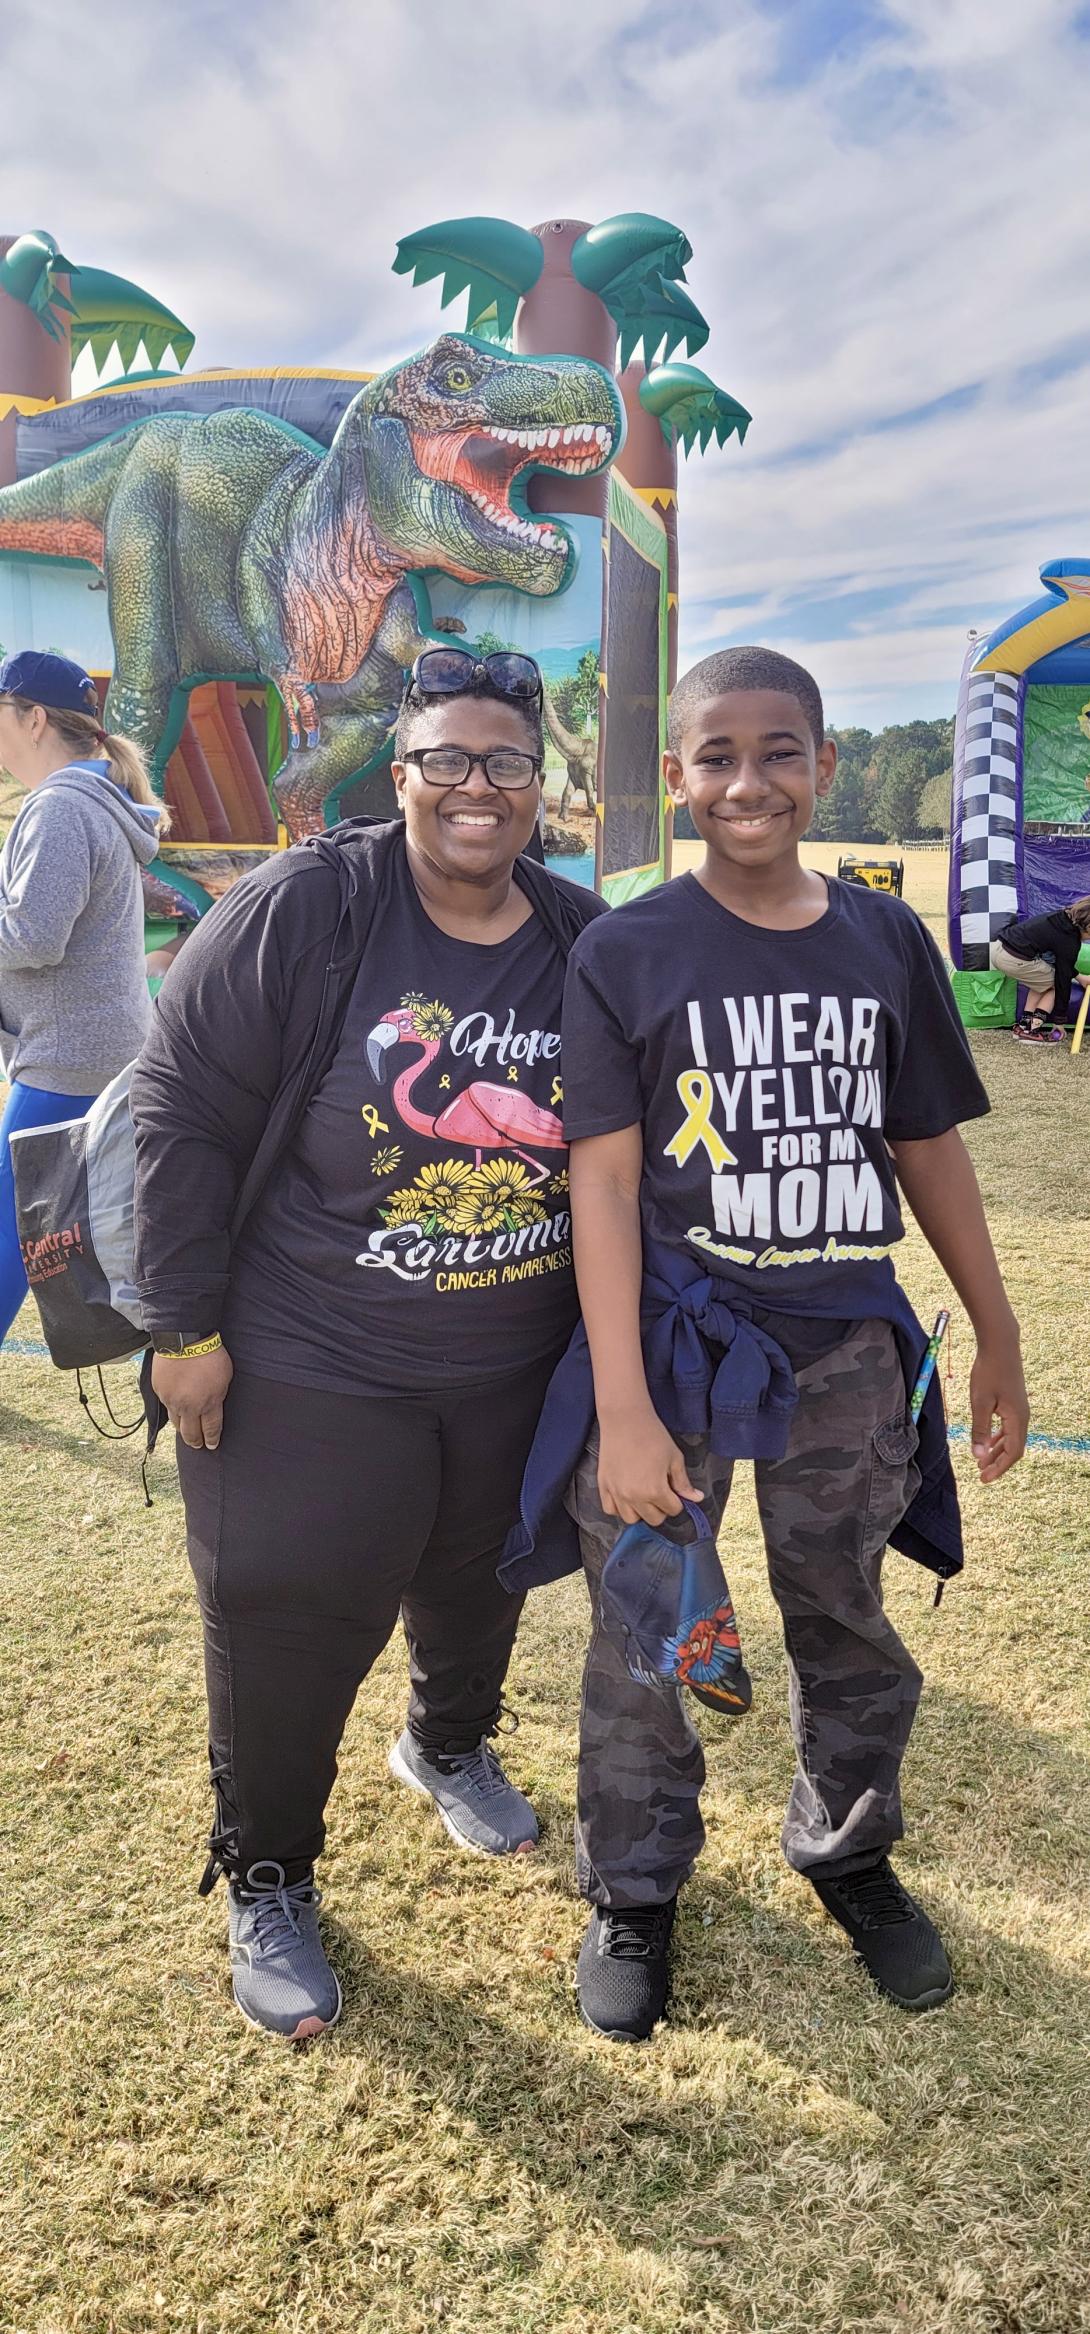 Sharon Alston with a Sarcoma Survivor shirt and her son Cason with a shirt that says "I wear yellow for my mom" stand in front of a dinosaur attraction